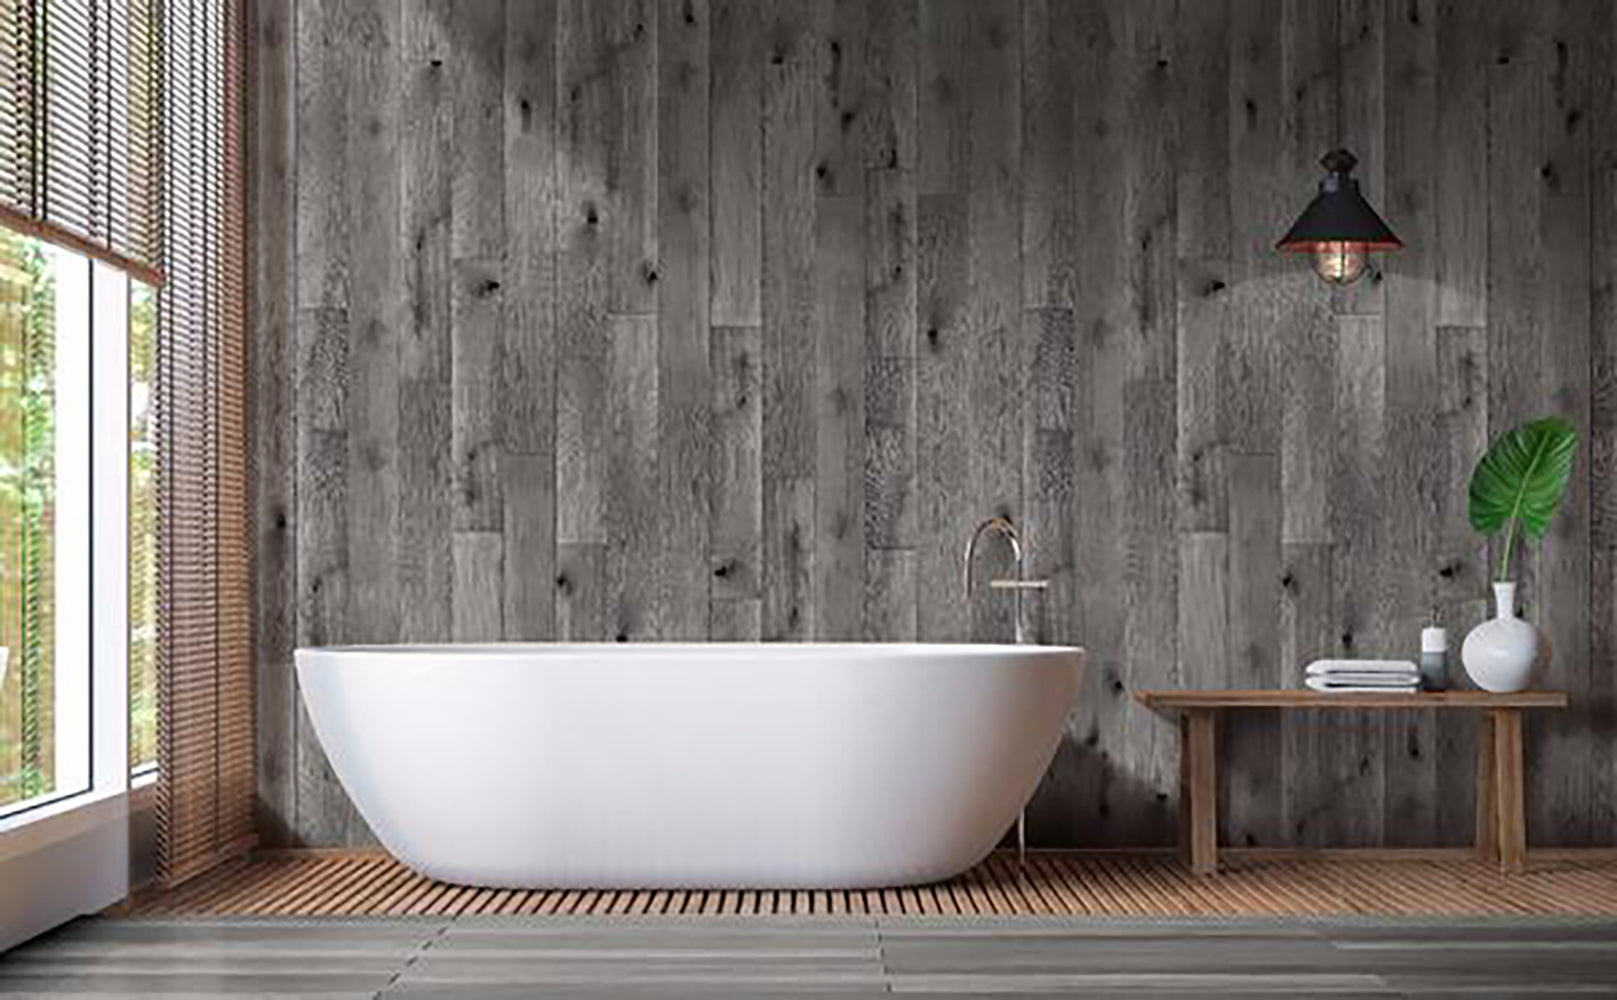 If you are looking for bathroom wall cladding, we are your one stop estore!